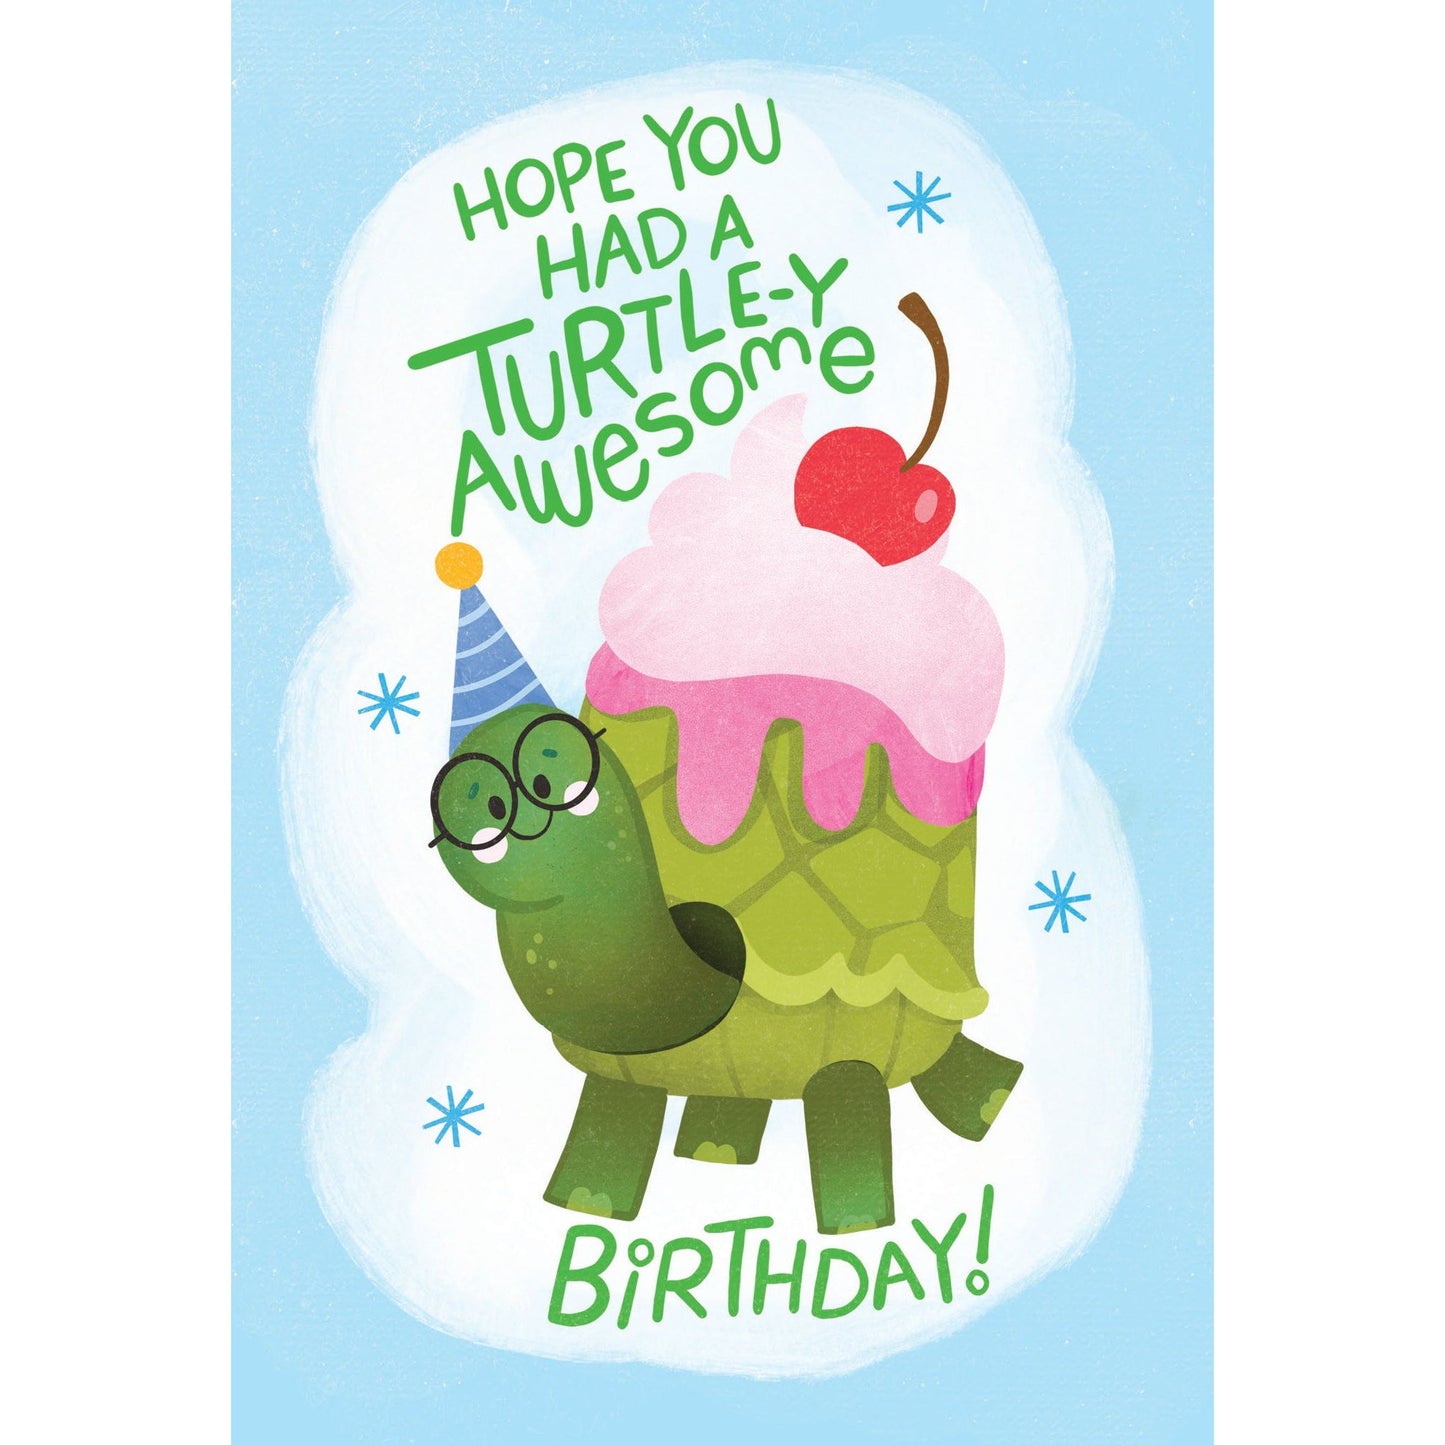 Turtle-y Awesome Belated Birthday Card